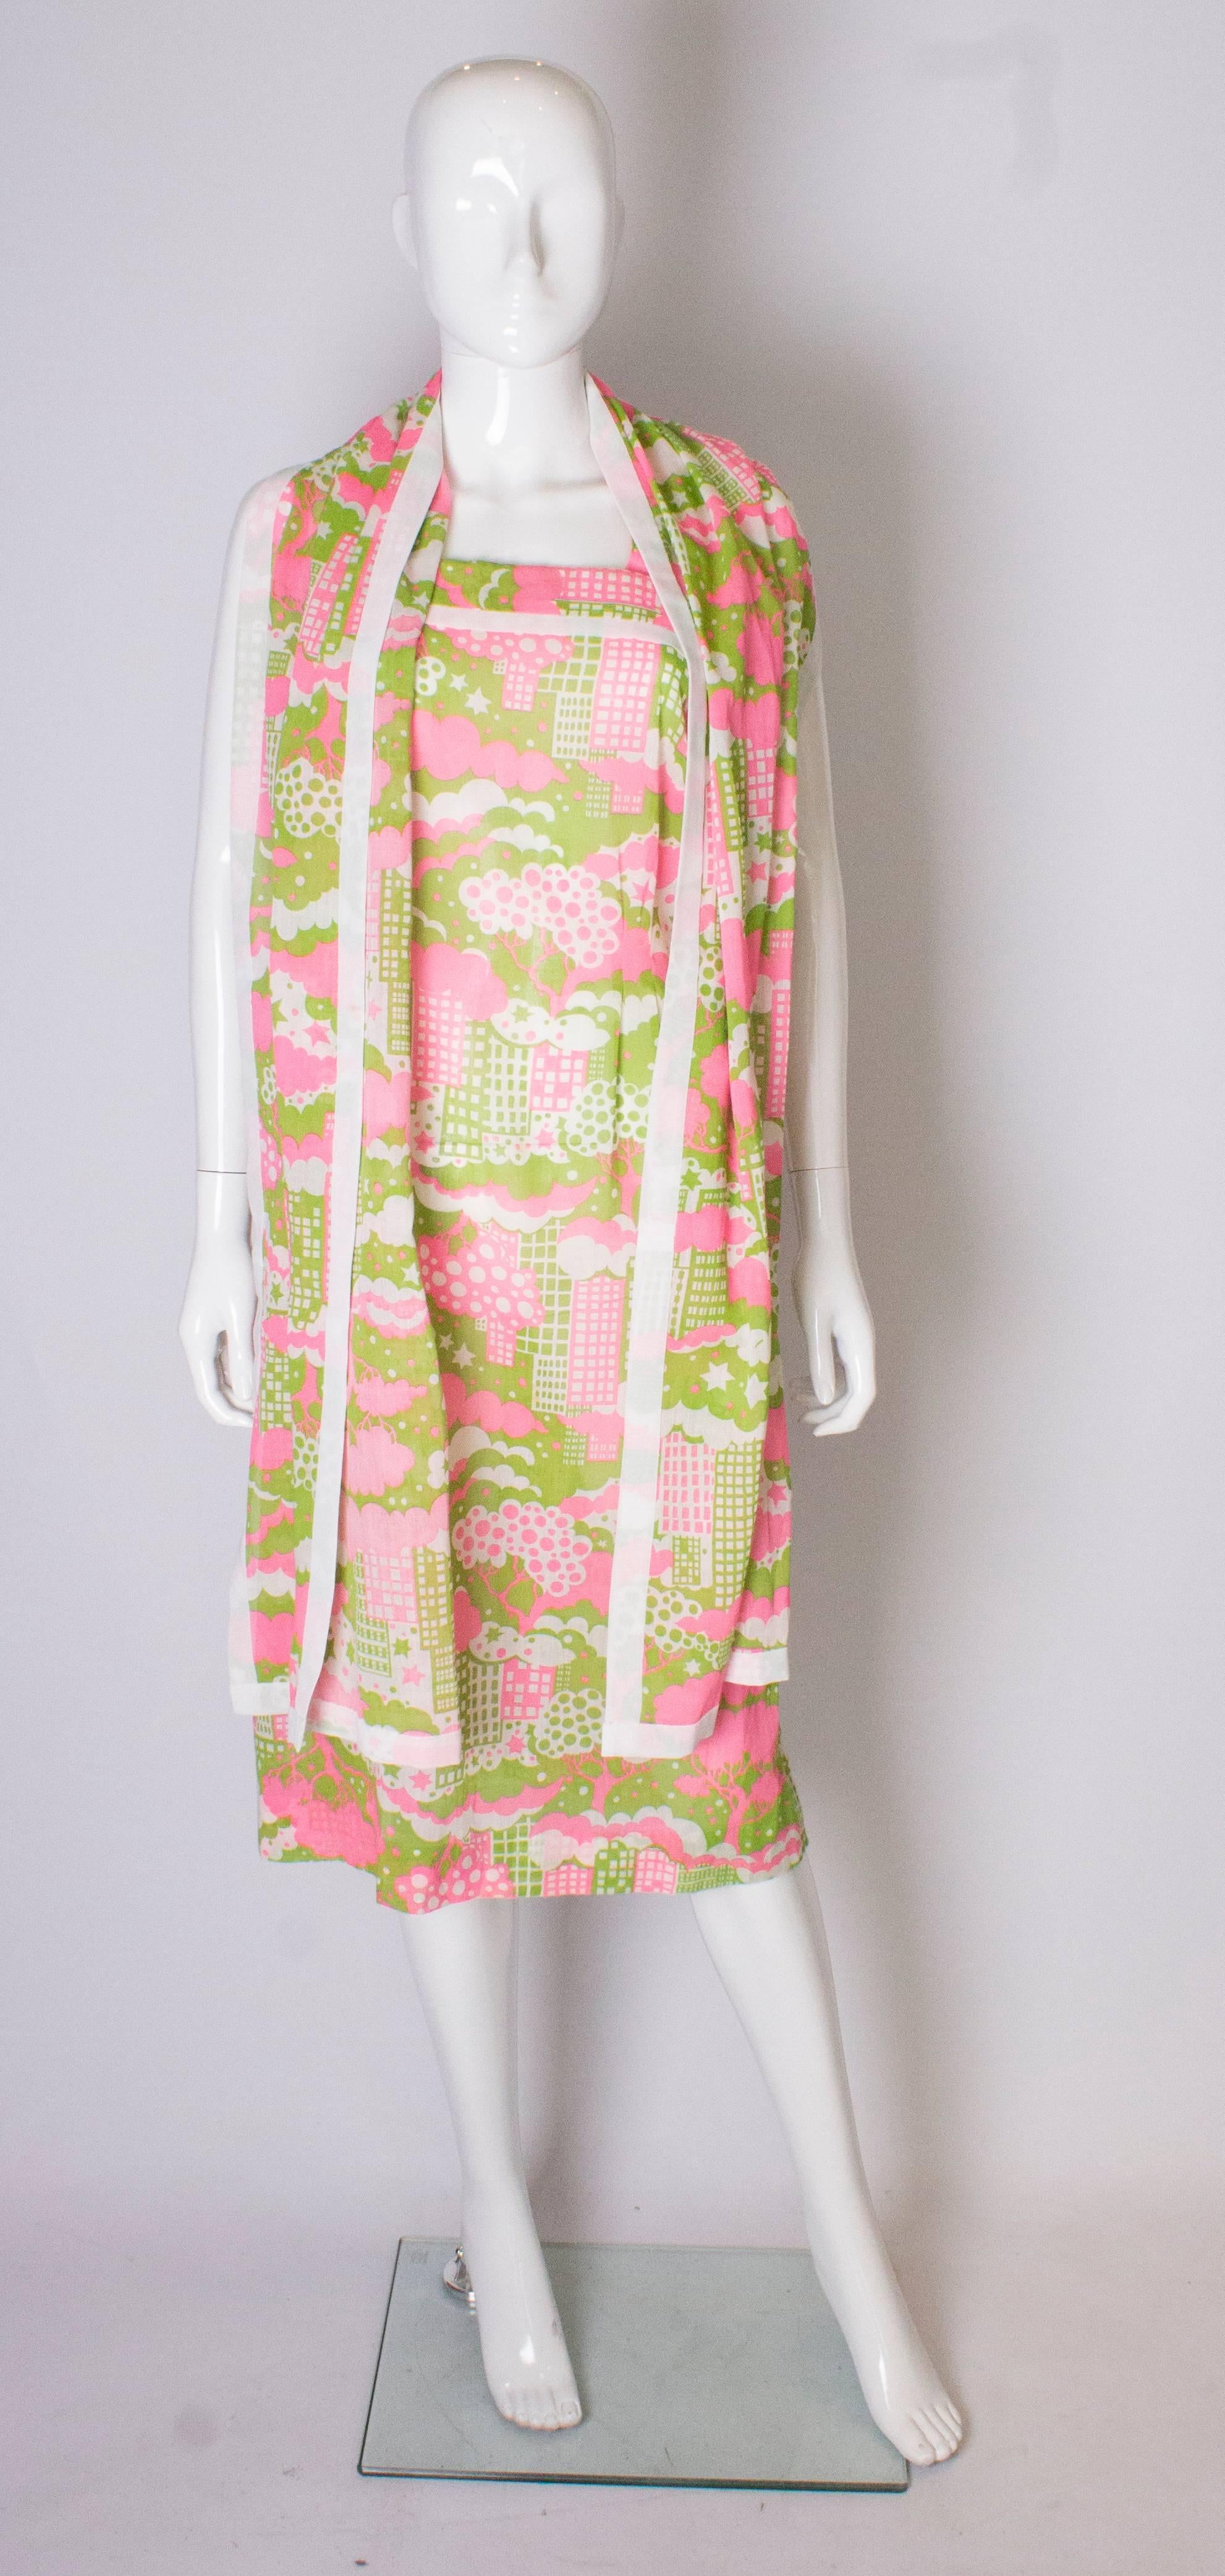 A fun abstract printed  sundress with matching scarf. The dress is a print of pink, white and sage green ,  with a white trim.  It has two straps and a central back zip.
The scarf is the same fabric and measures 88'' x 18''.